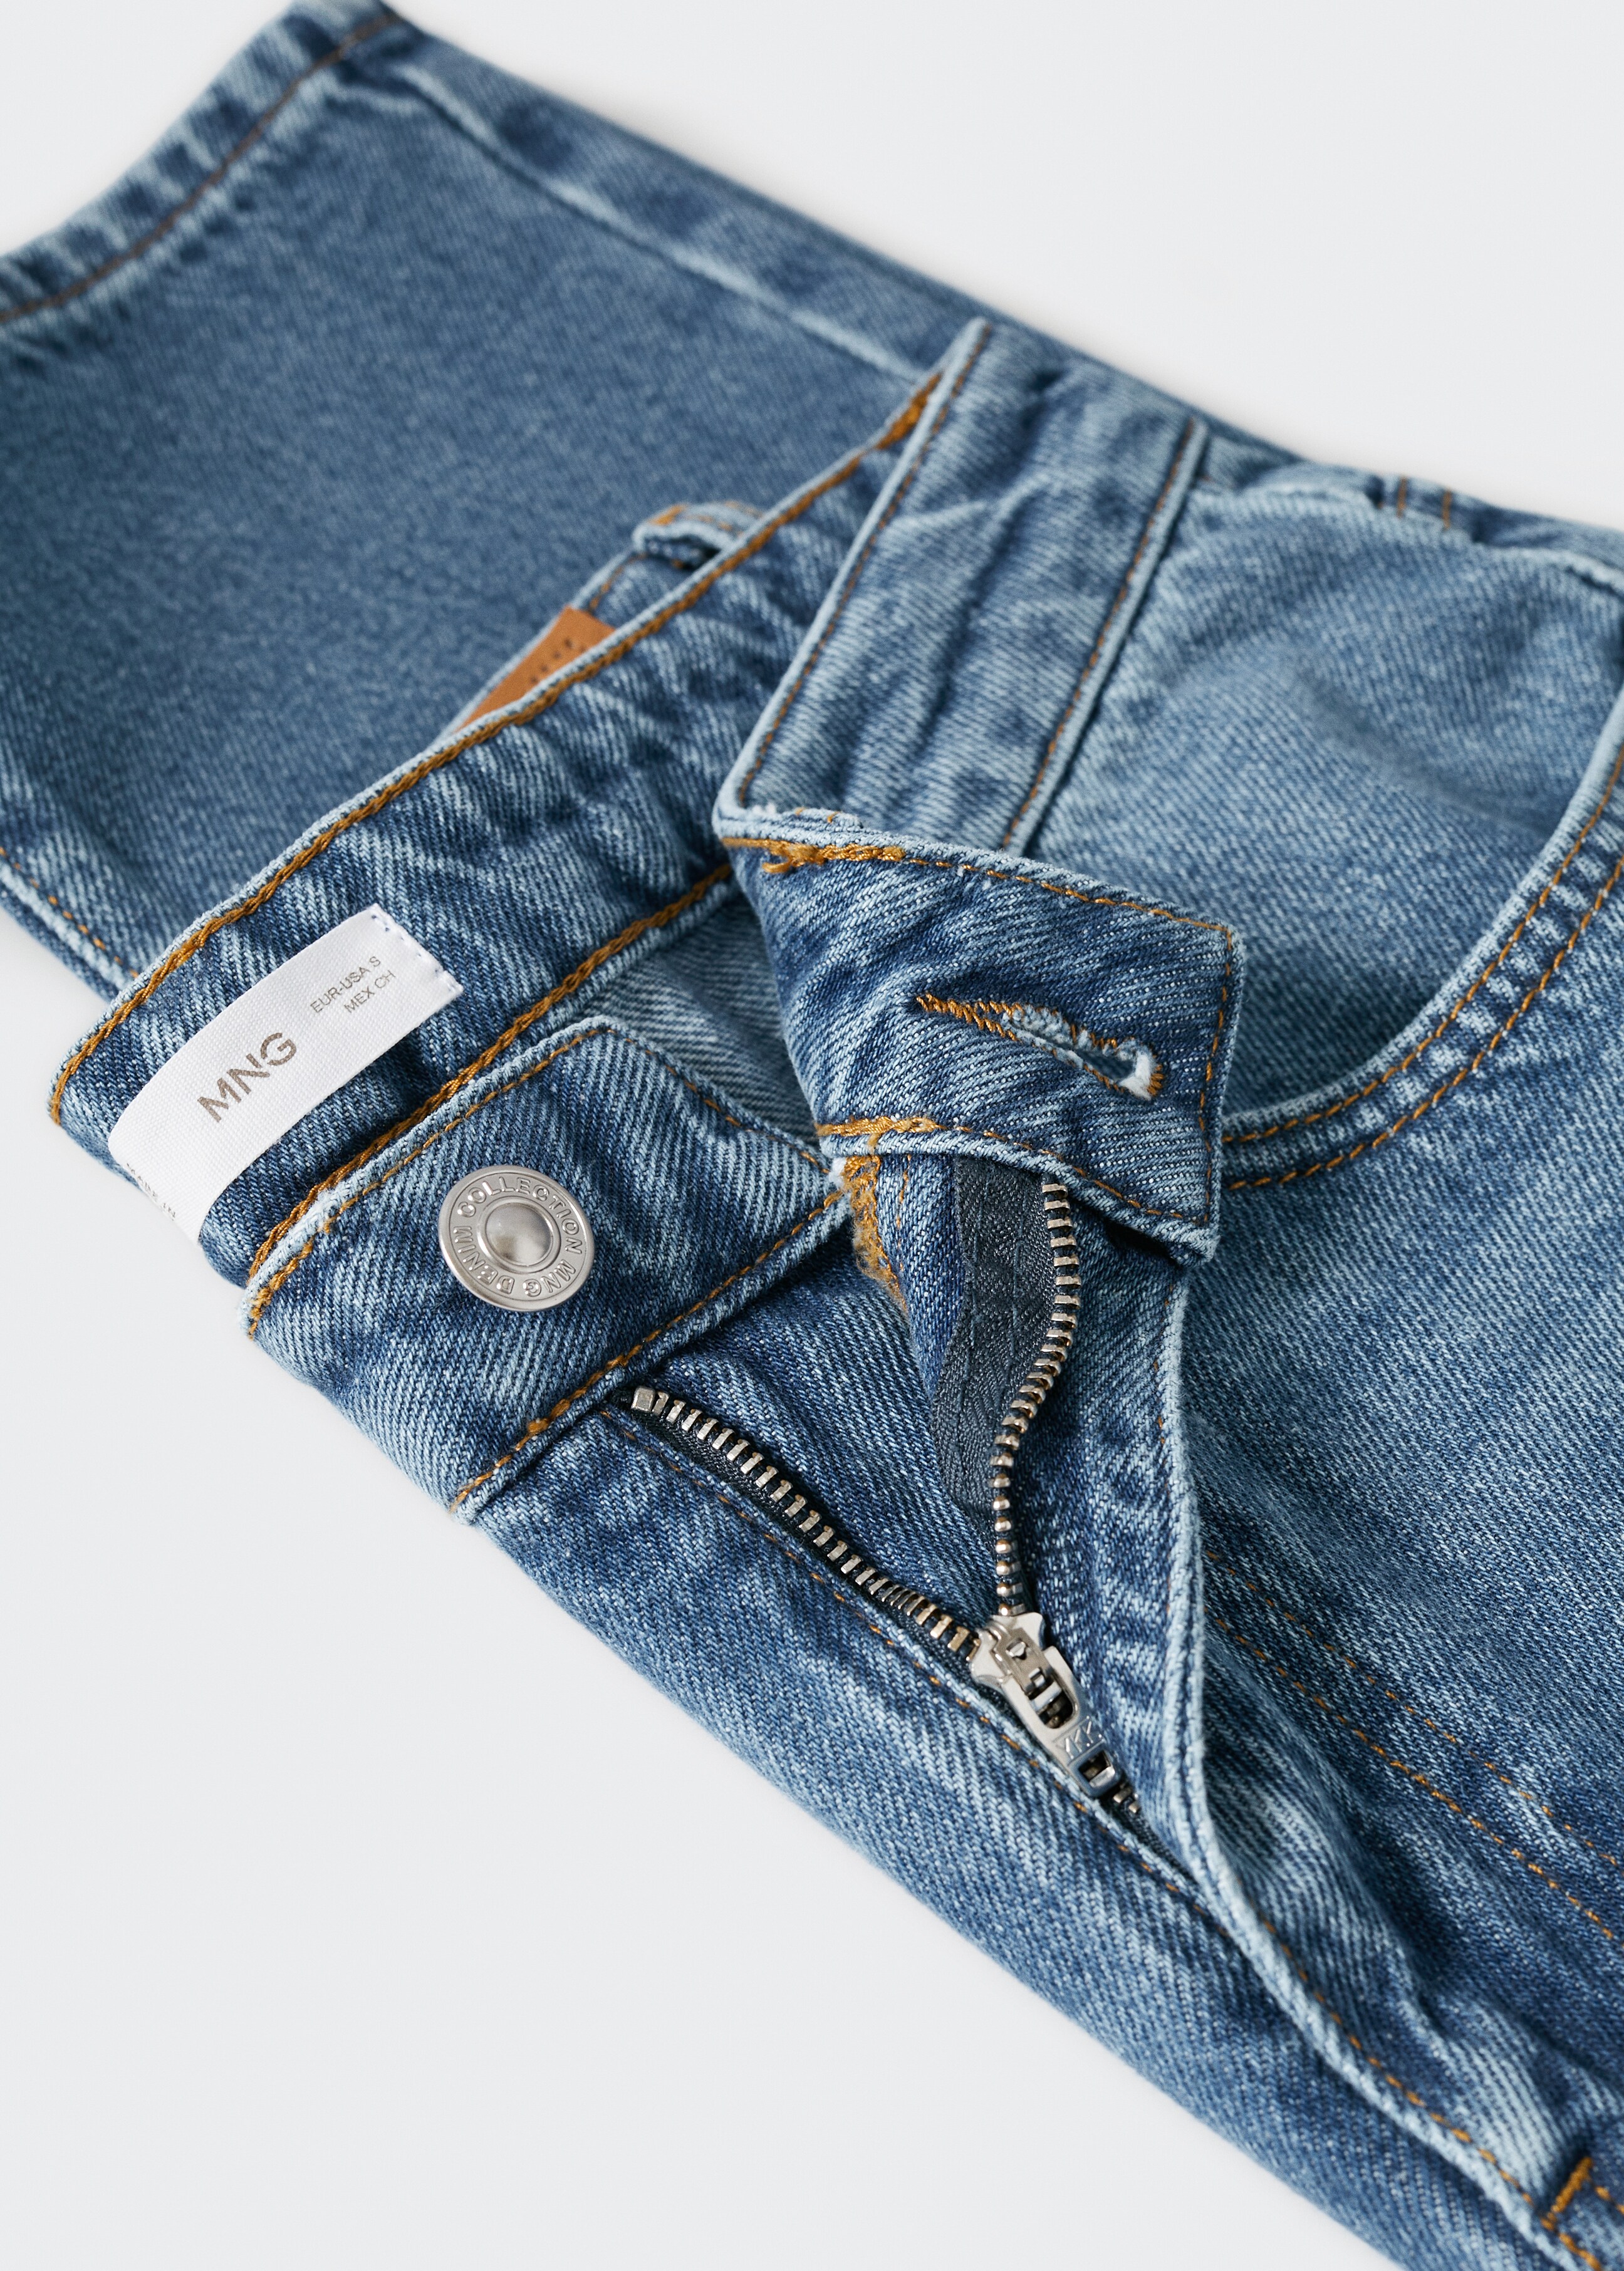 Loose-fit jeans - Details of the article 8